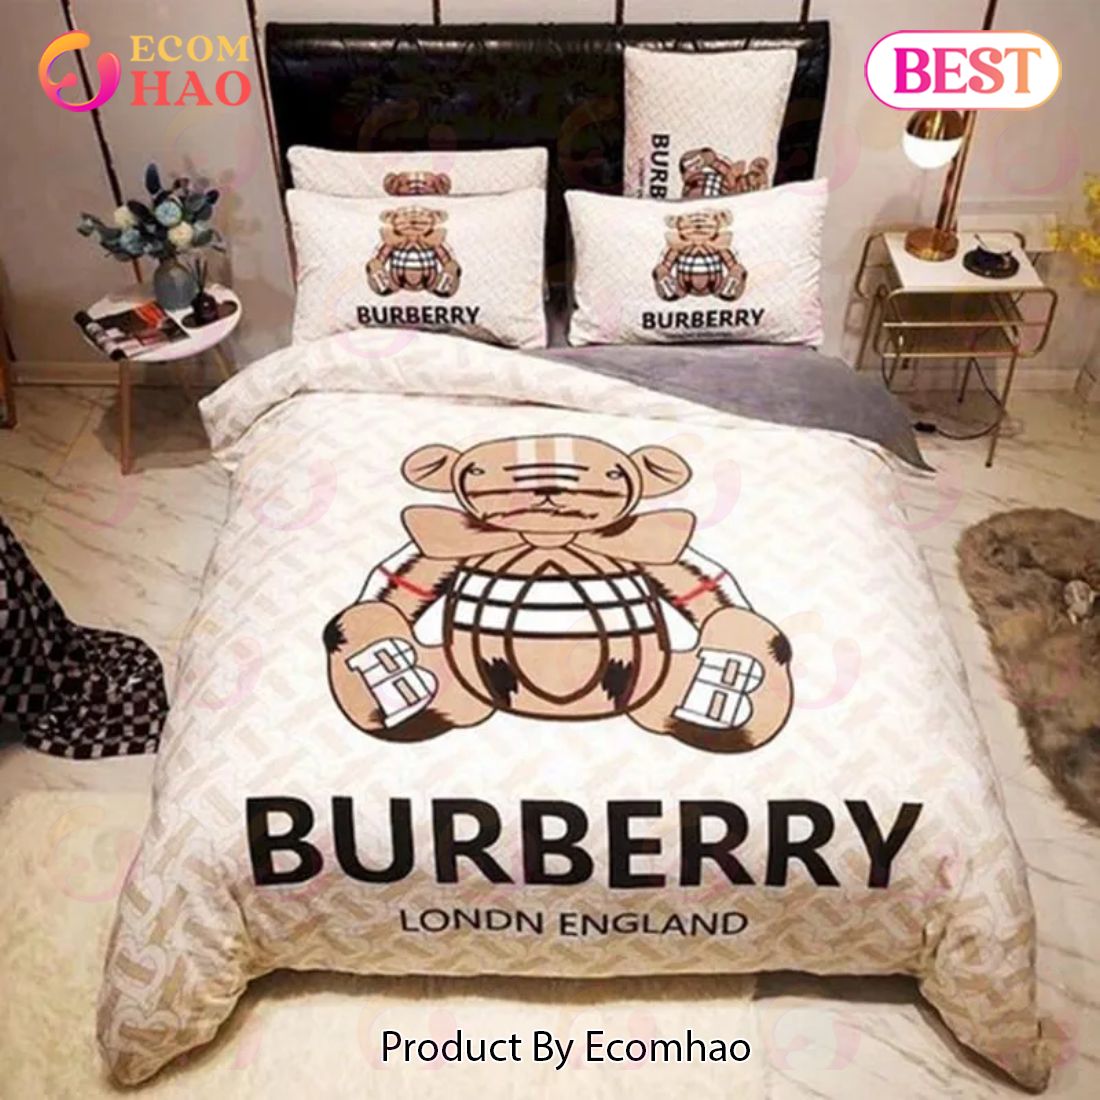 Burberry Bear Luxury Brand Bedding Sets Bedspread Duvet Cover Set Bedroom Decor Thanksgiving Decorations For Home Best Luxury Bed Sets Gift Thankgivings And Christmas